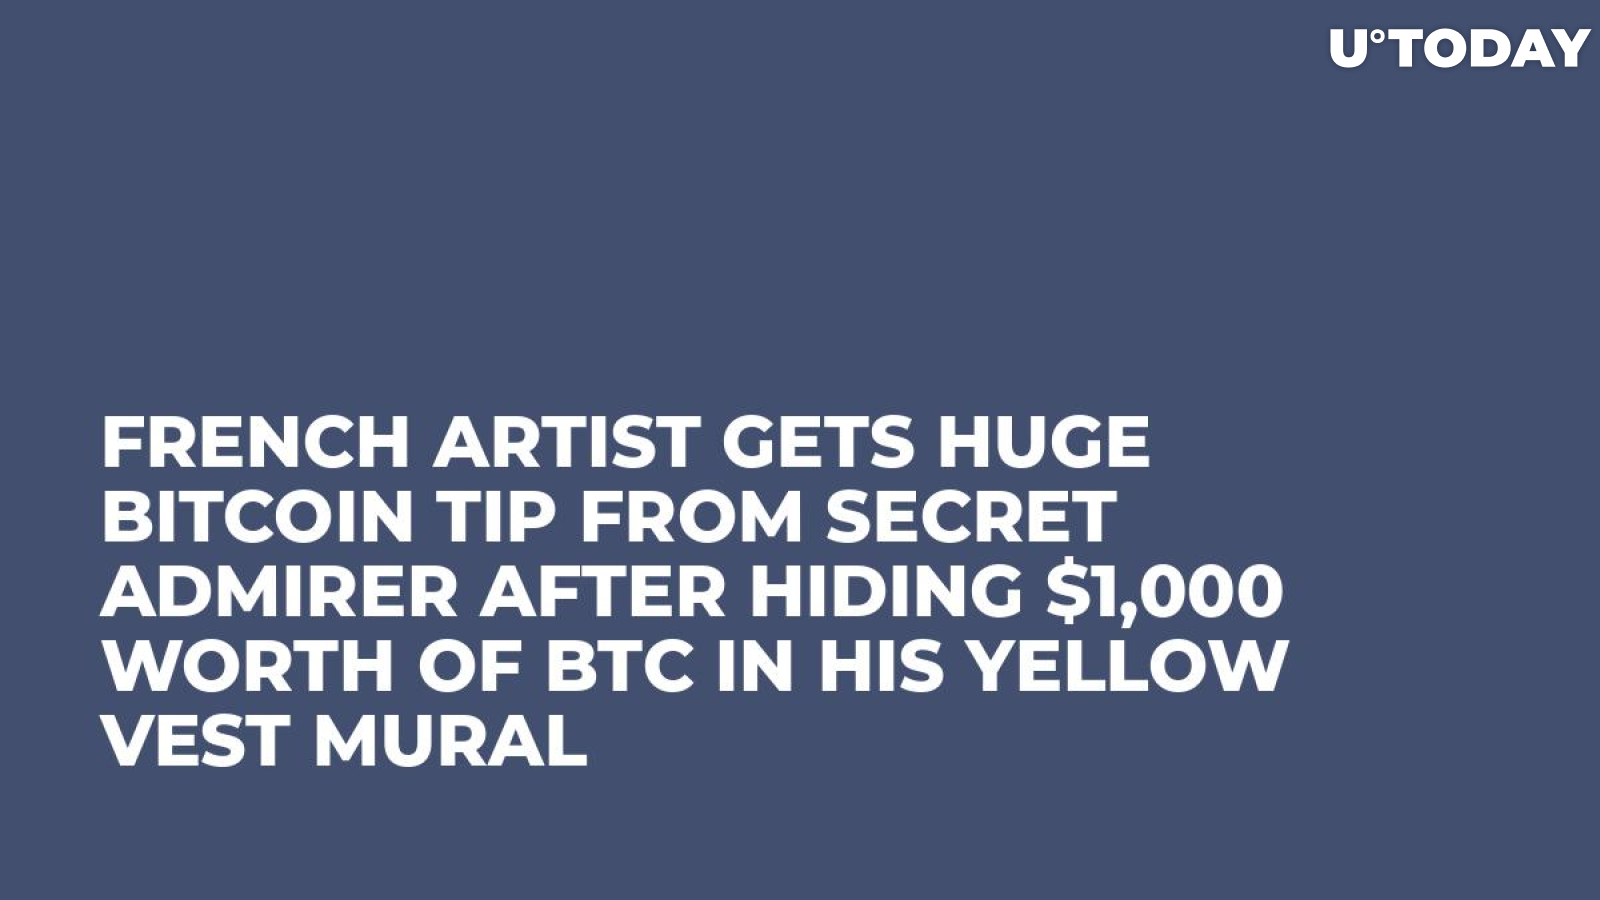 French Artist Gets Huge Bitcoin Tip from Secret Admirer After Hiding $1,000 Worth of BTC in His Yellow Vest Mural